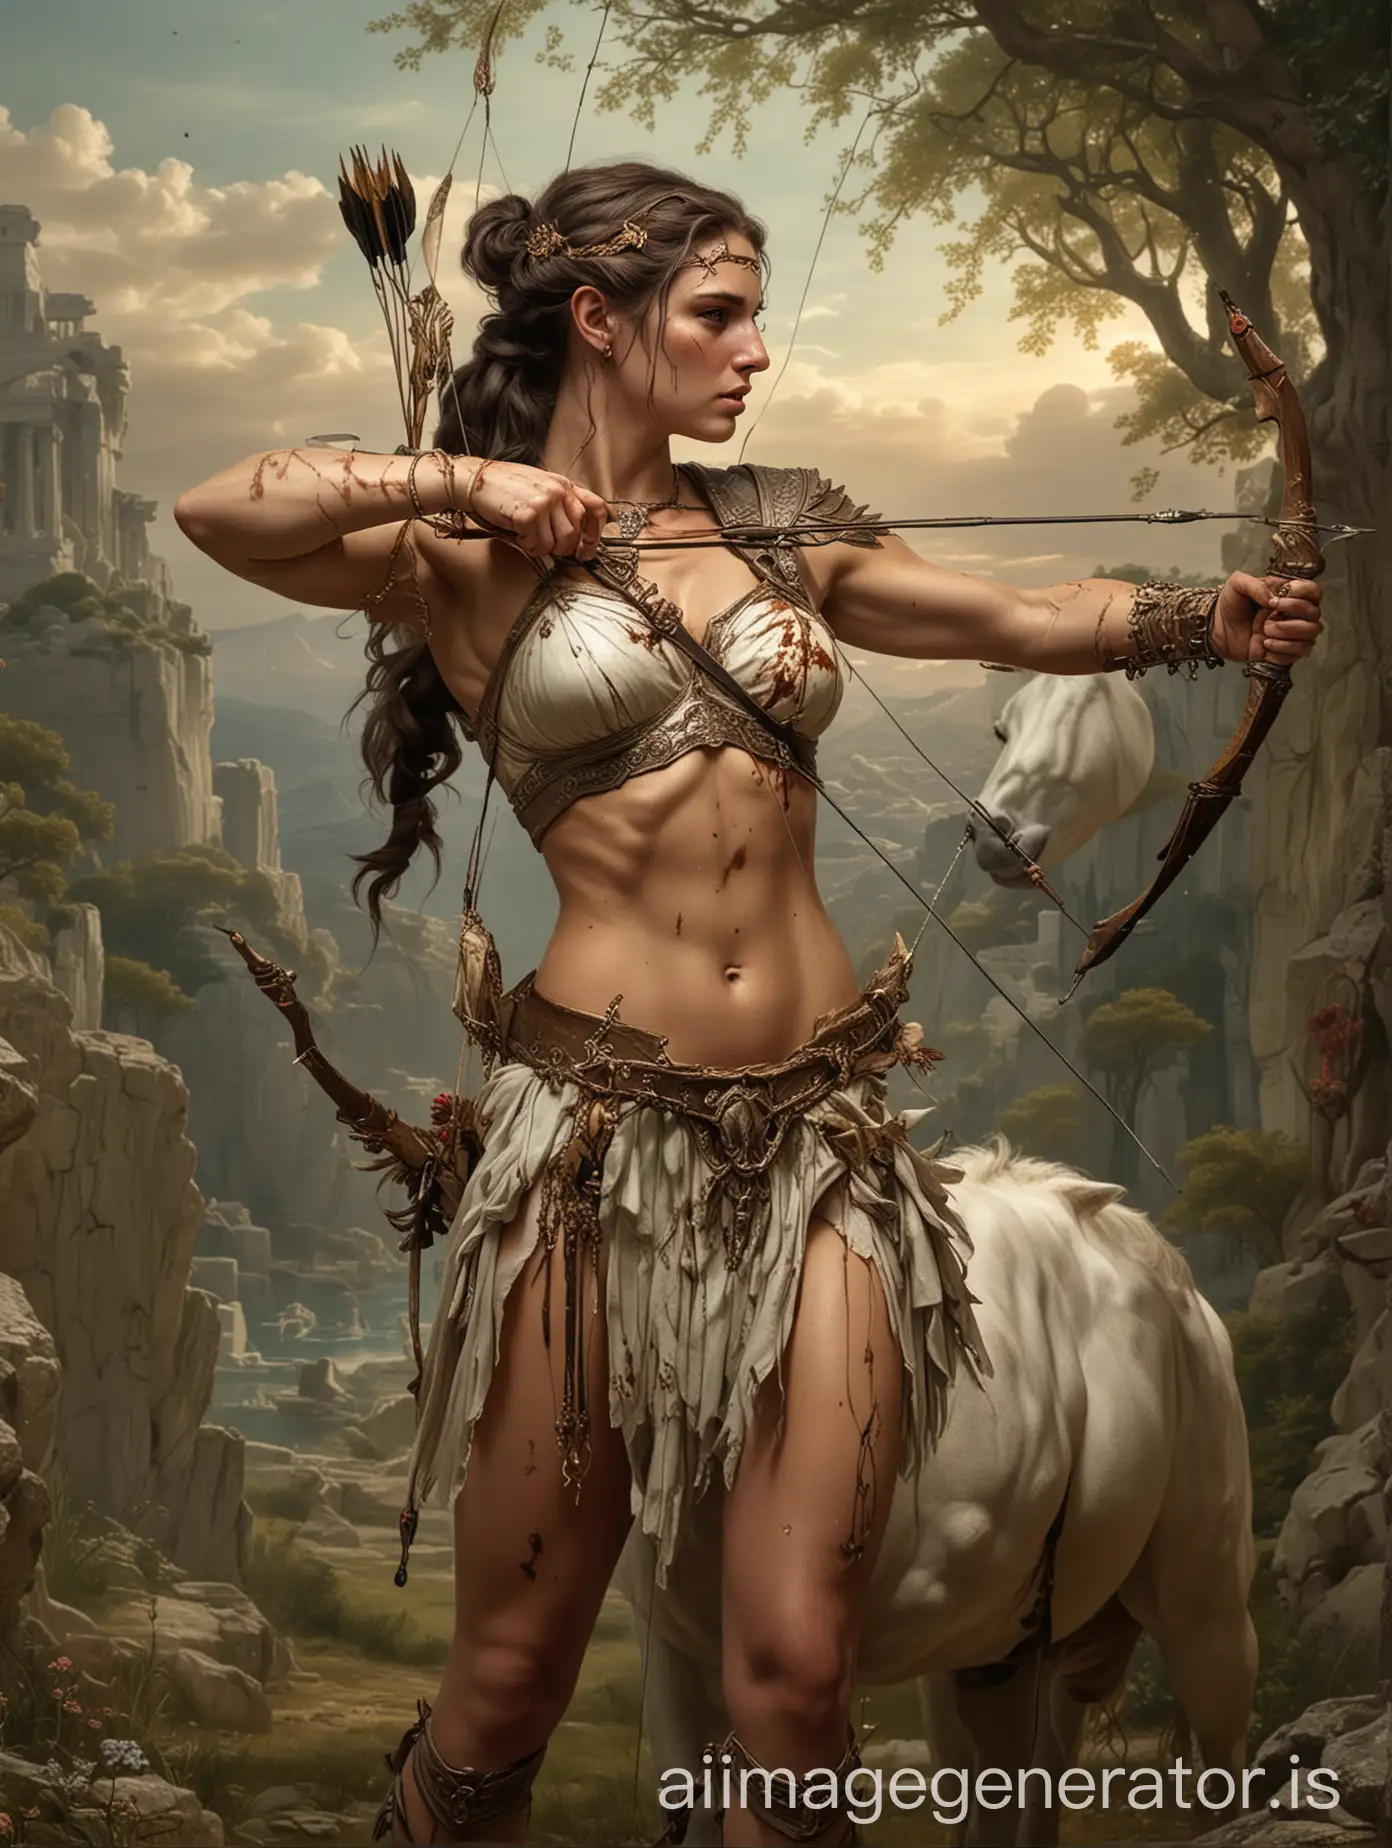 Realistic-Female-Centaur-Archer-with-Bow-and-Wounds-in-Greek-Mythology-Setting